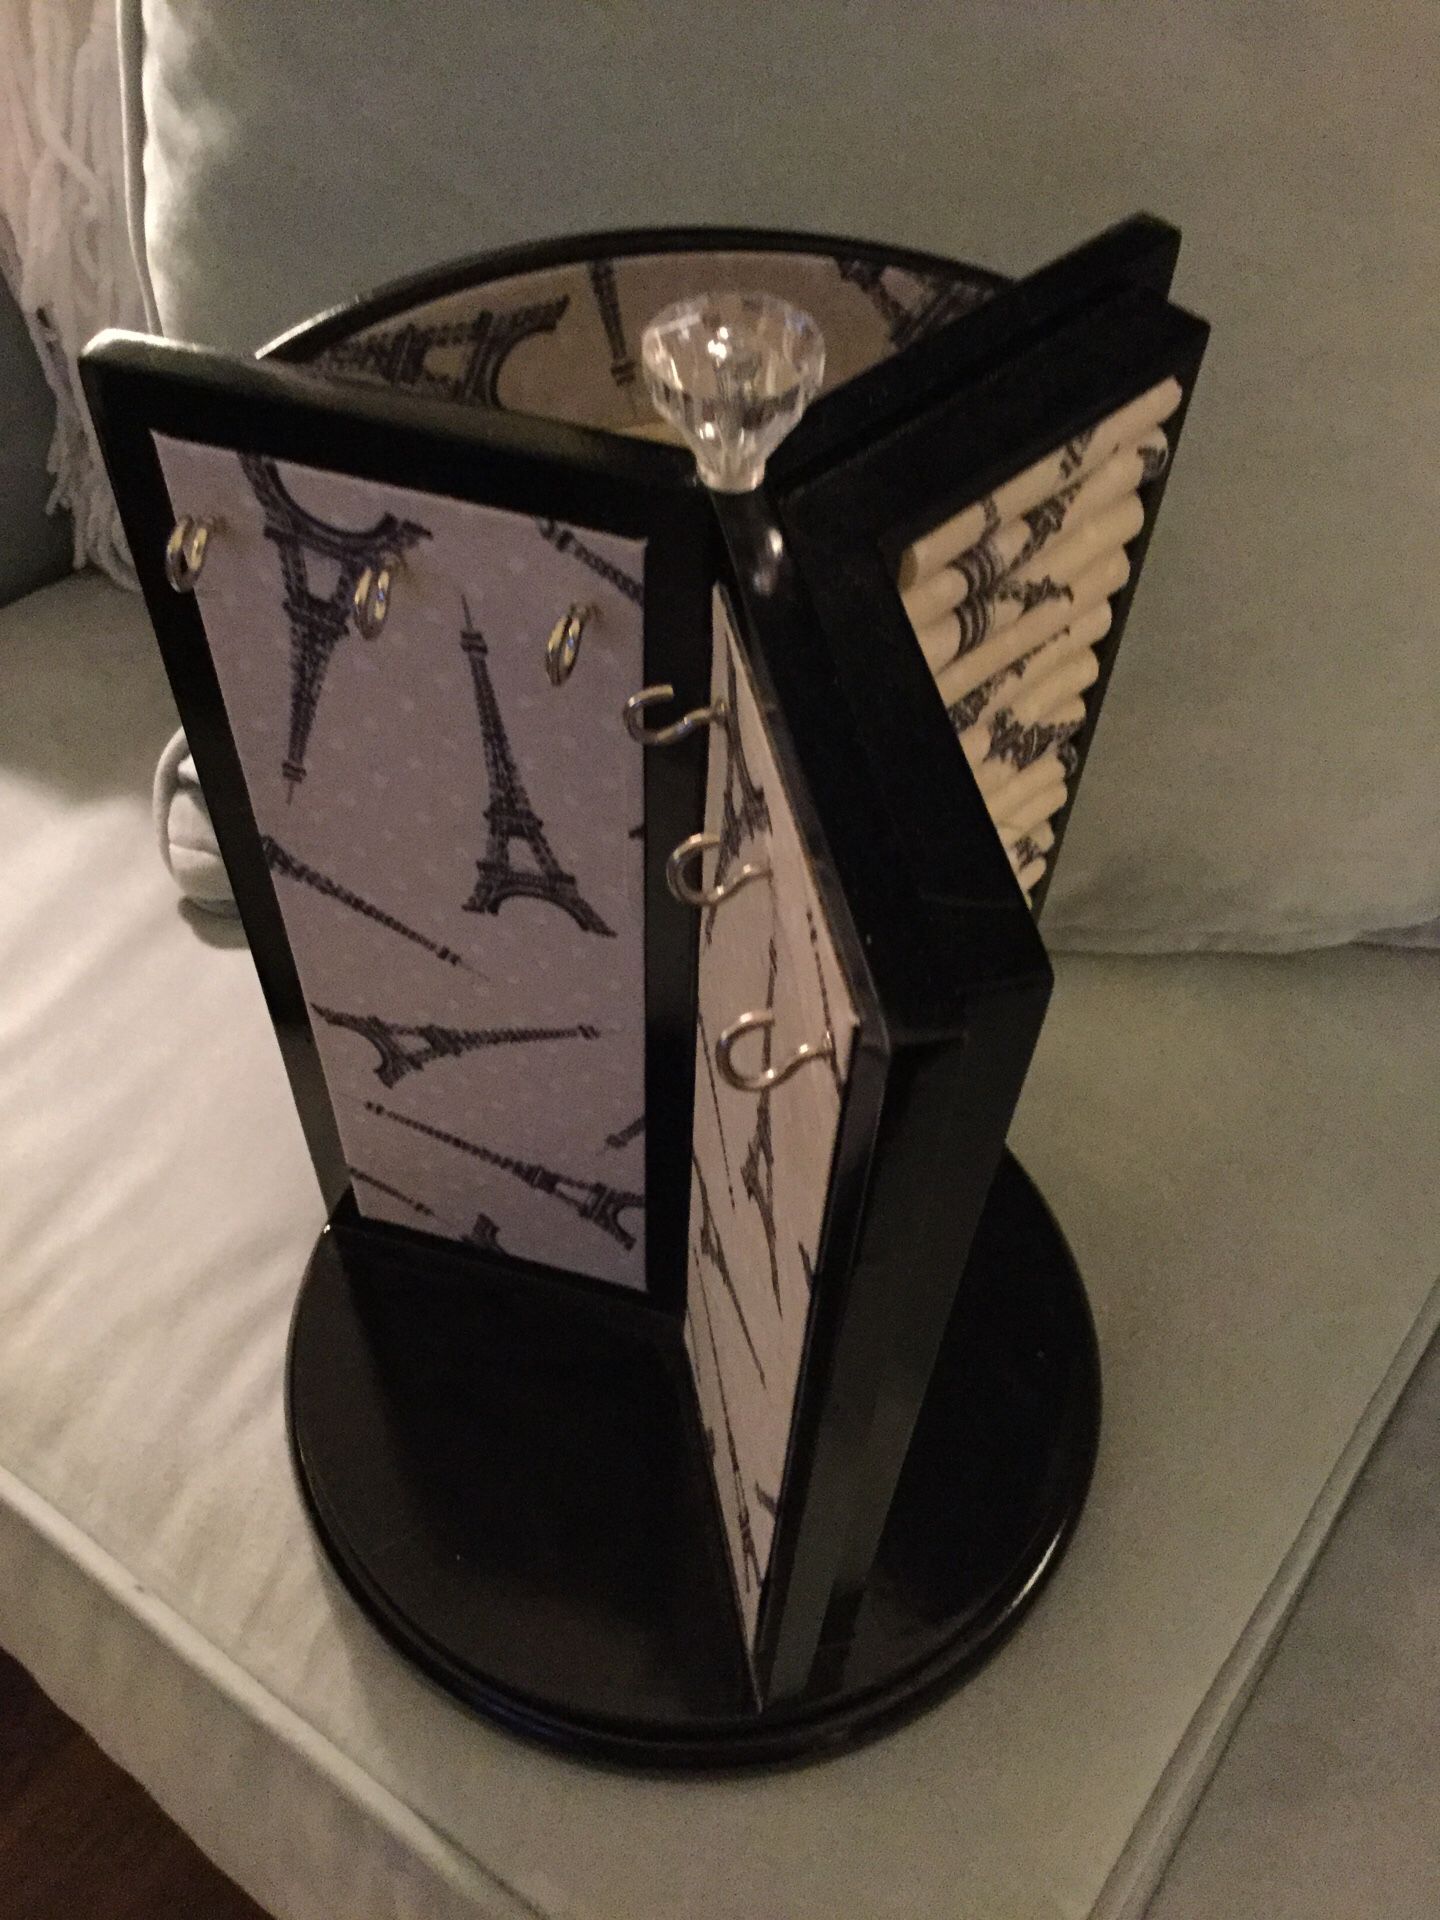 Turn table jewelry holder in Paris print black lacquer.perfect condition.